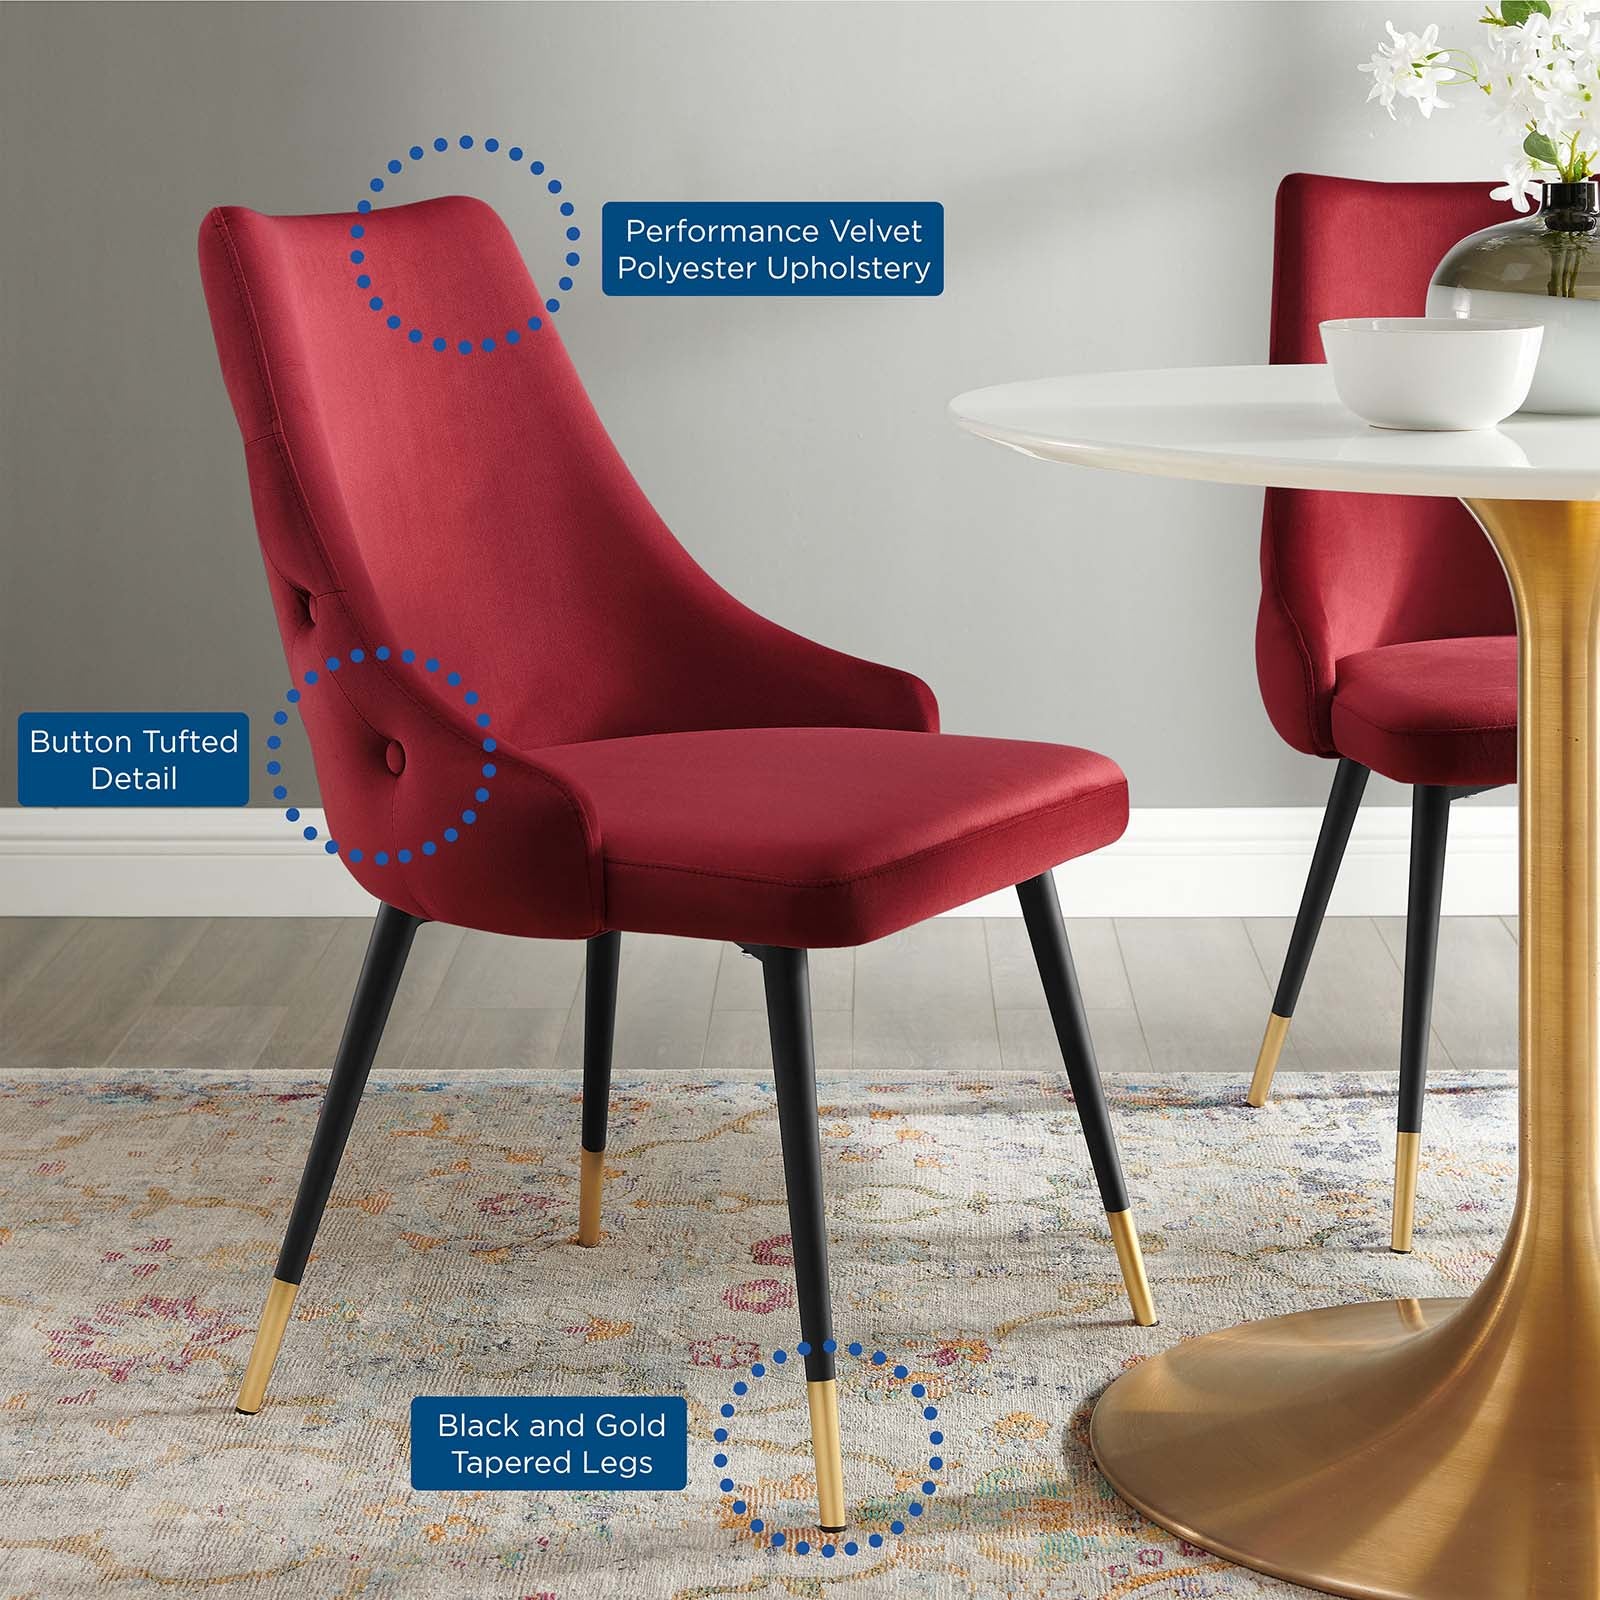 Modway Dining Chairs - Adorn Tufted Performance Velvet Dining Side Chair Maroon